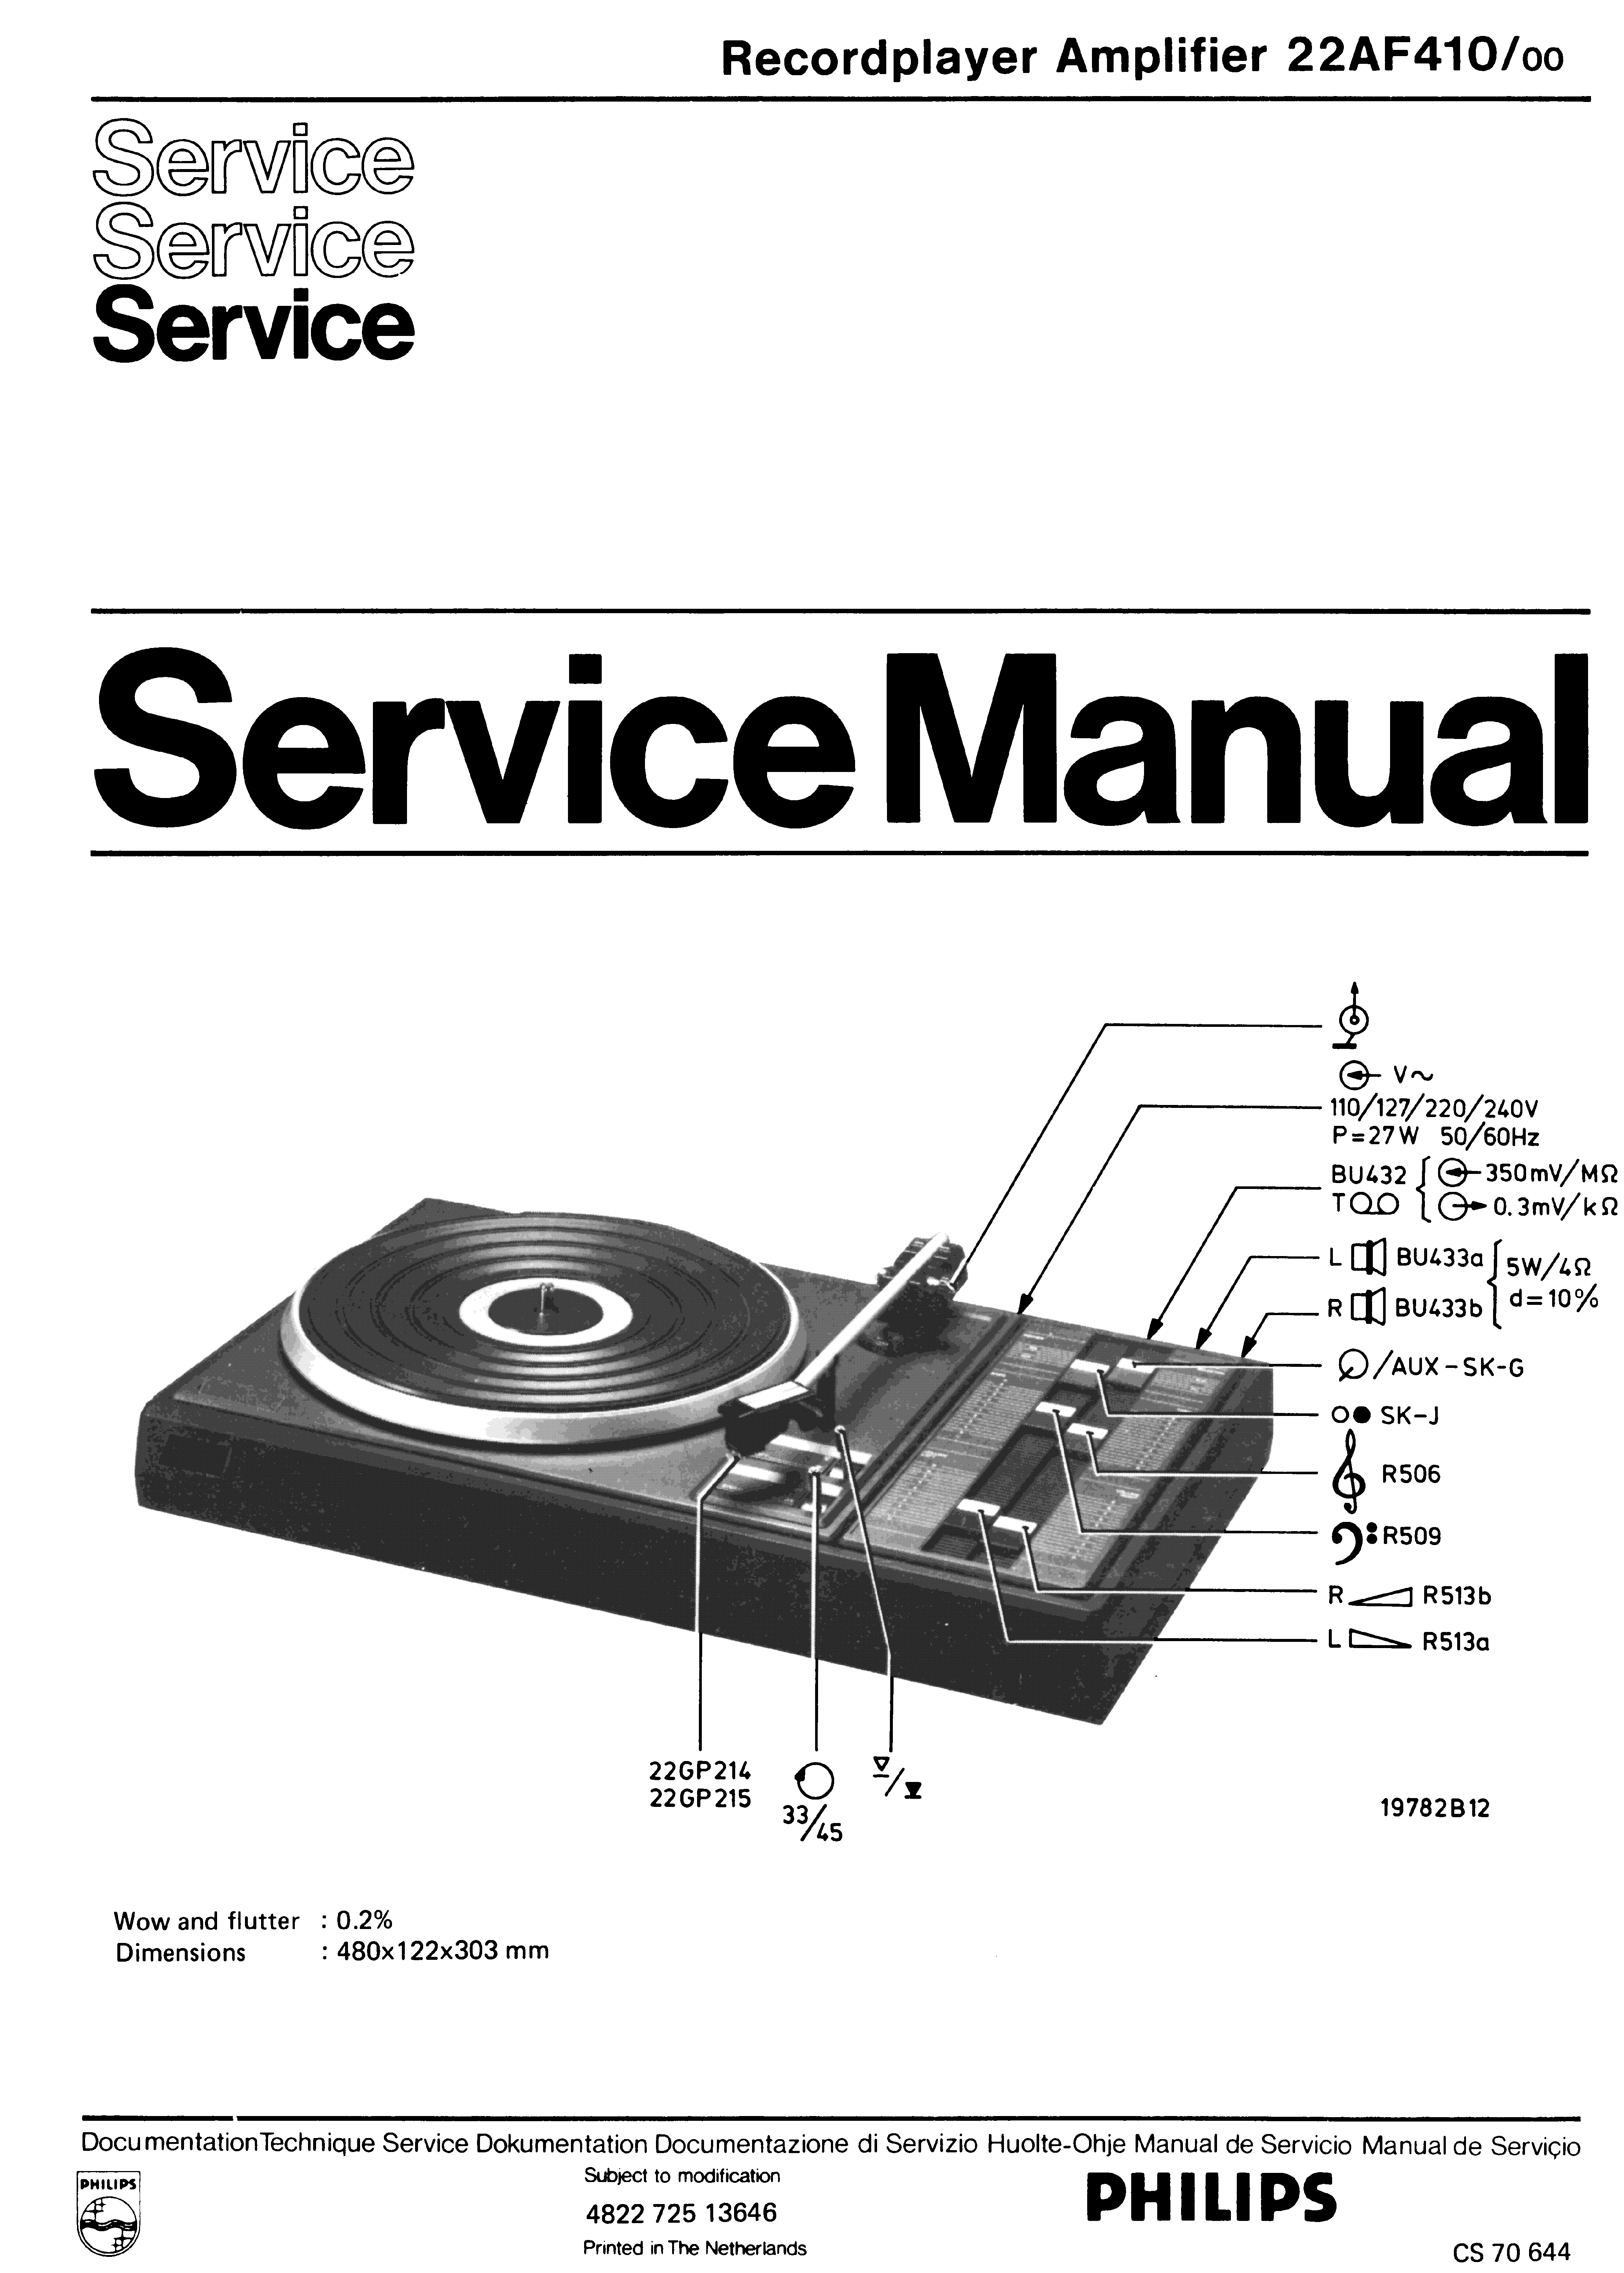 PHILIPS 22AF410 RECORDPLAYER AMPLIFIER SM service manual (1st page)